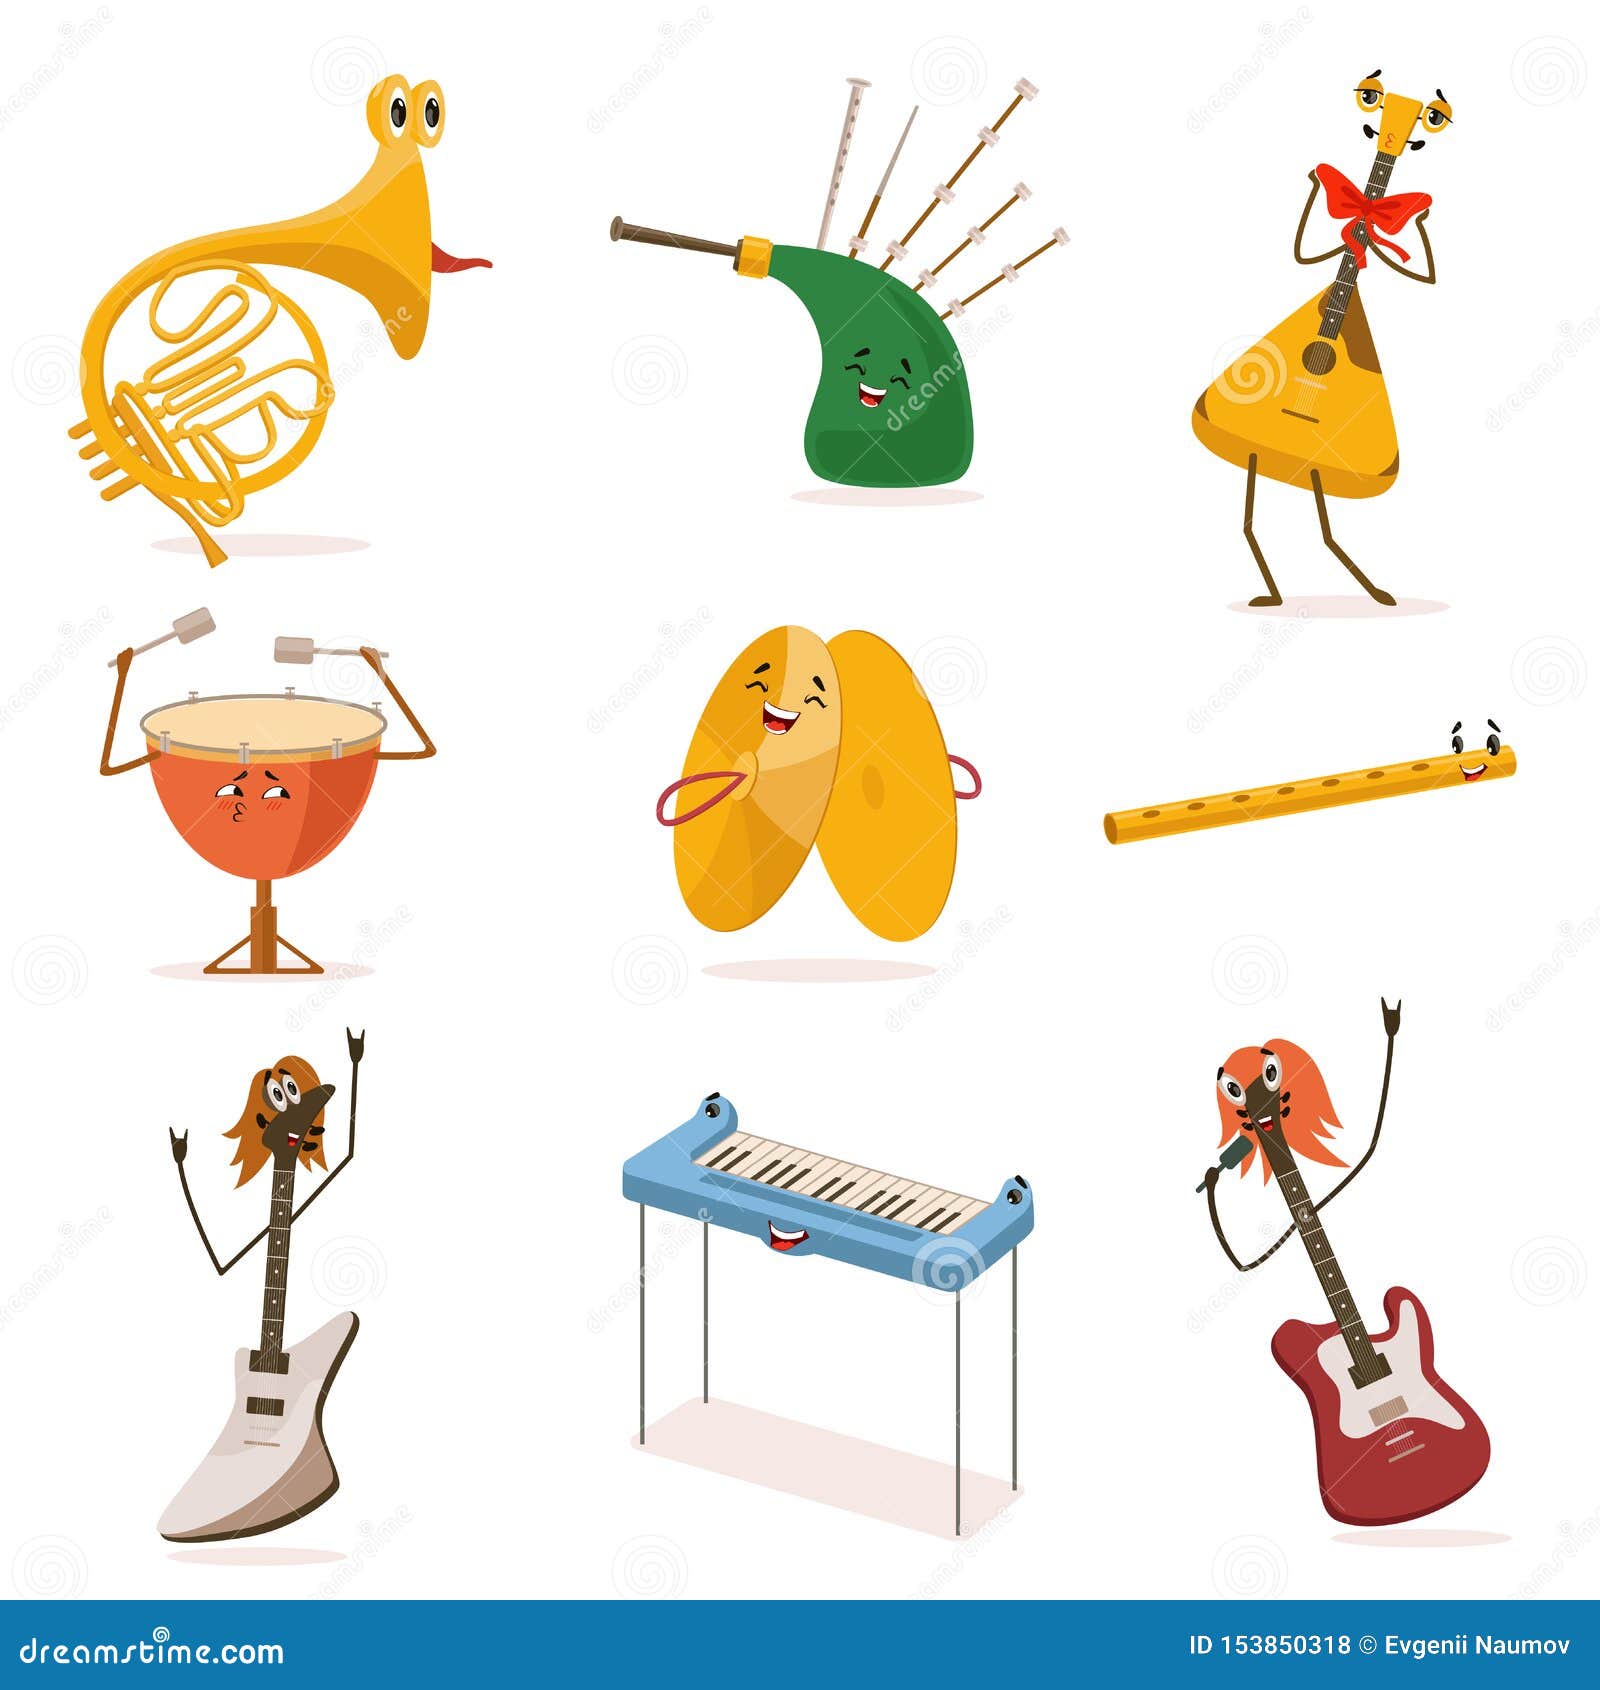 Funny Musical Instruments Cartoon Characters with Funny Faces Set, Guitar,  Synthesizer, Flute, Bagpipes, Balalaika Stock Vector - Illustration of  musical, horn: 153850318